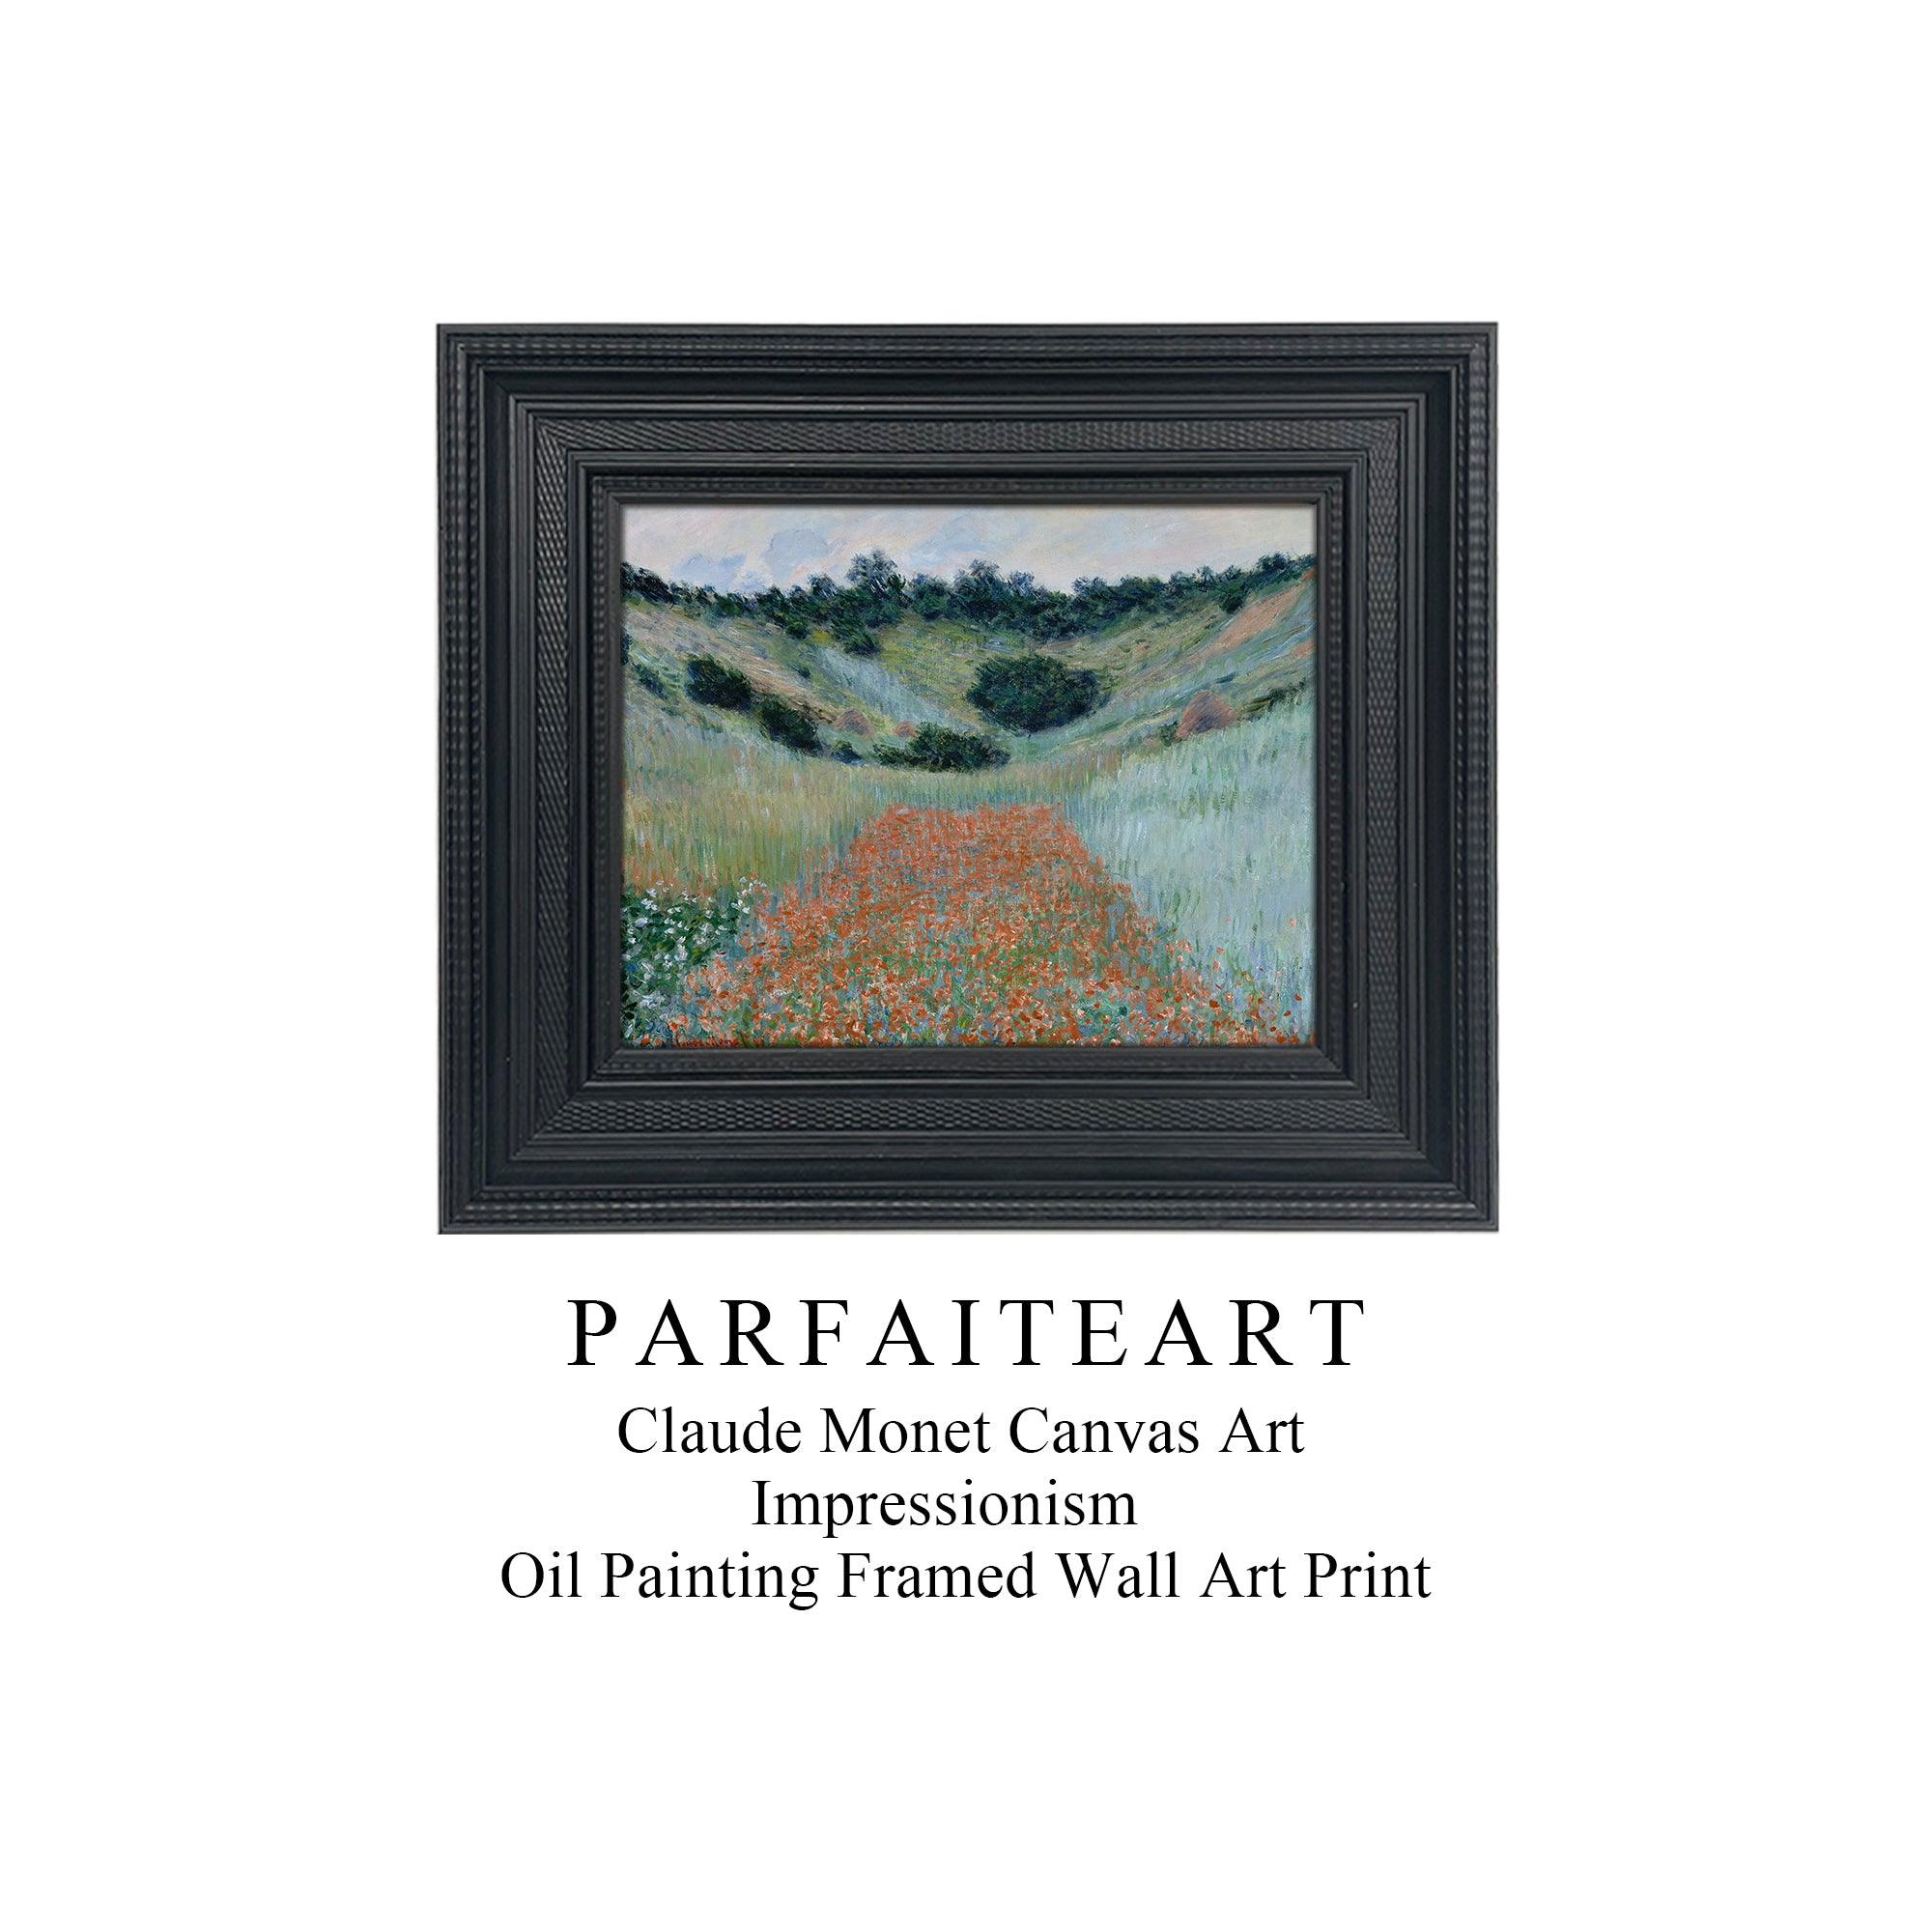 Famous Painting Print，Claude Monet，Moody Wall Decor，Black Vintage Frame,Solid Wood,High-Quality Waterproof Decorative Canvas Art， Hotel Aisle Living Room Home Decor Art 18x15 inches 2 Black